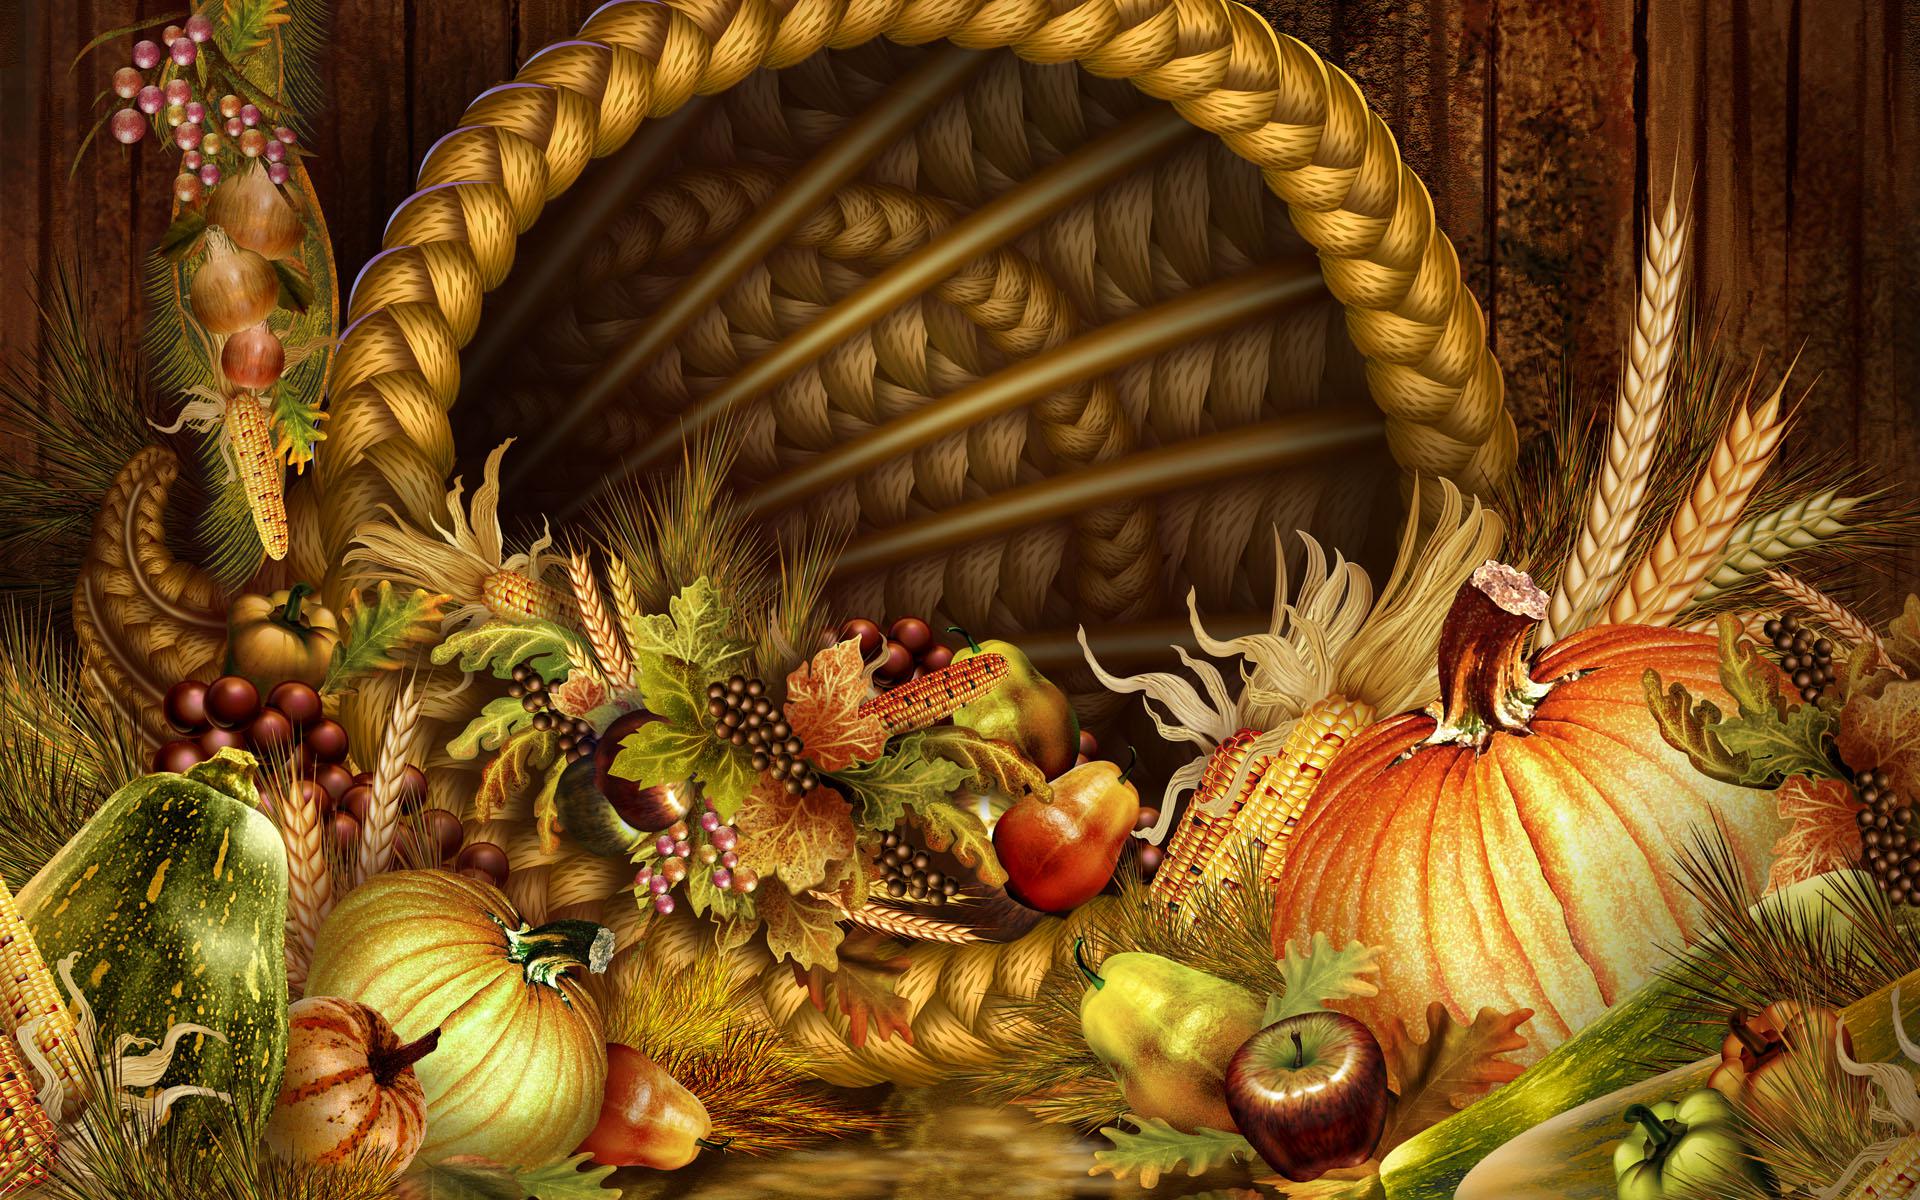 Thanksgiving Background Photos 2016 | Wallpapers, Backgrounds ...